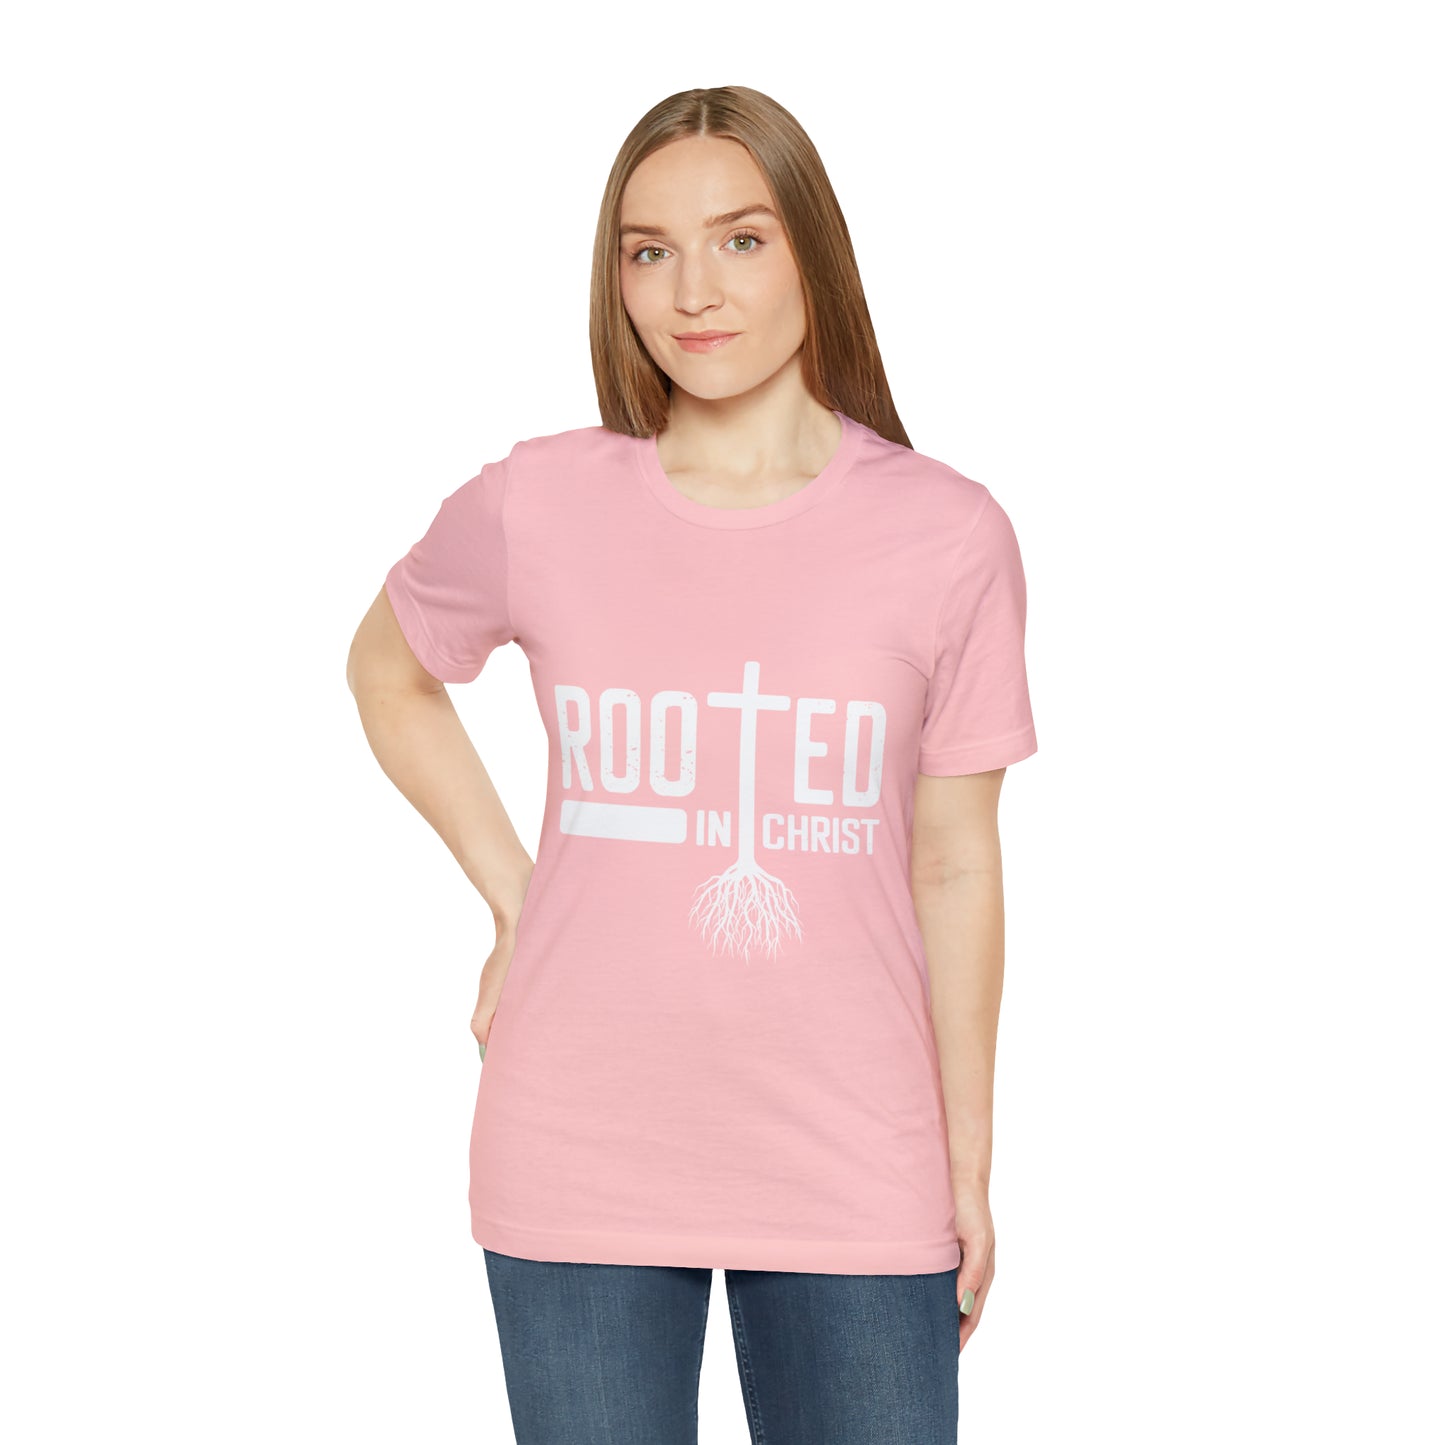 ROOTED IN CHRIST Unisex Jersey Short Sleeve Tee